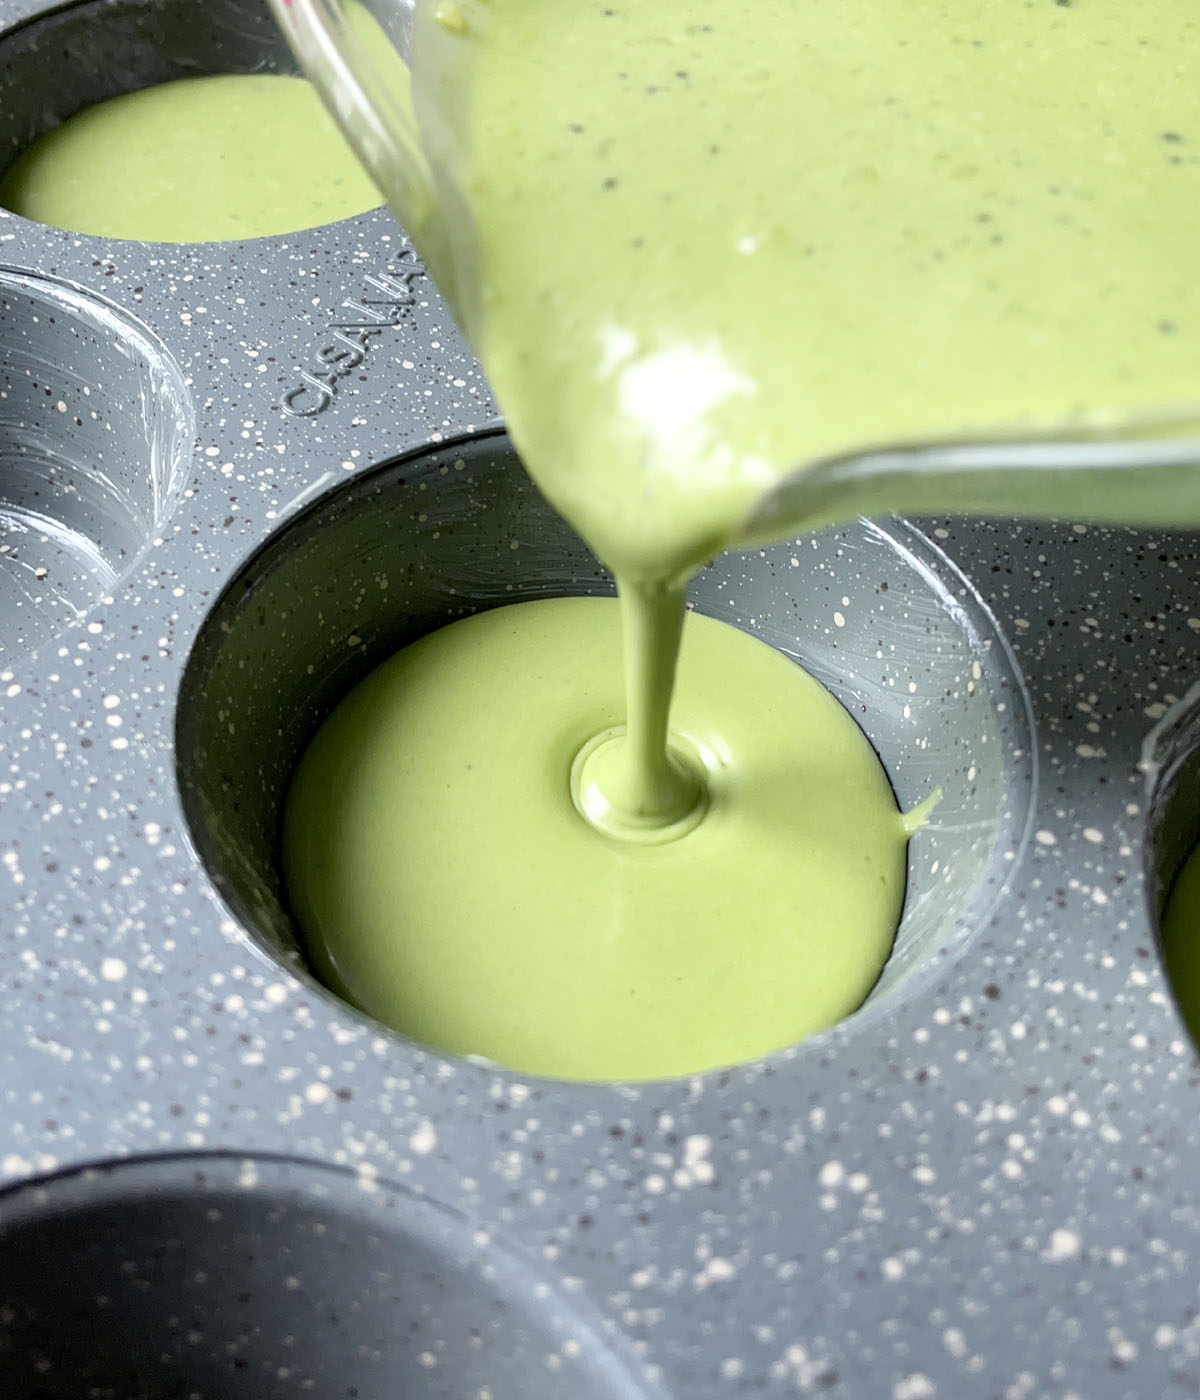 A green liquid being poured into a gray speckled muffin tin.